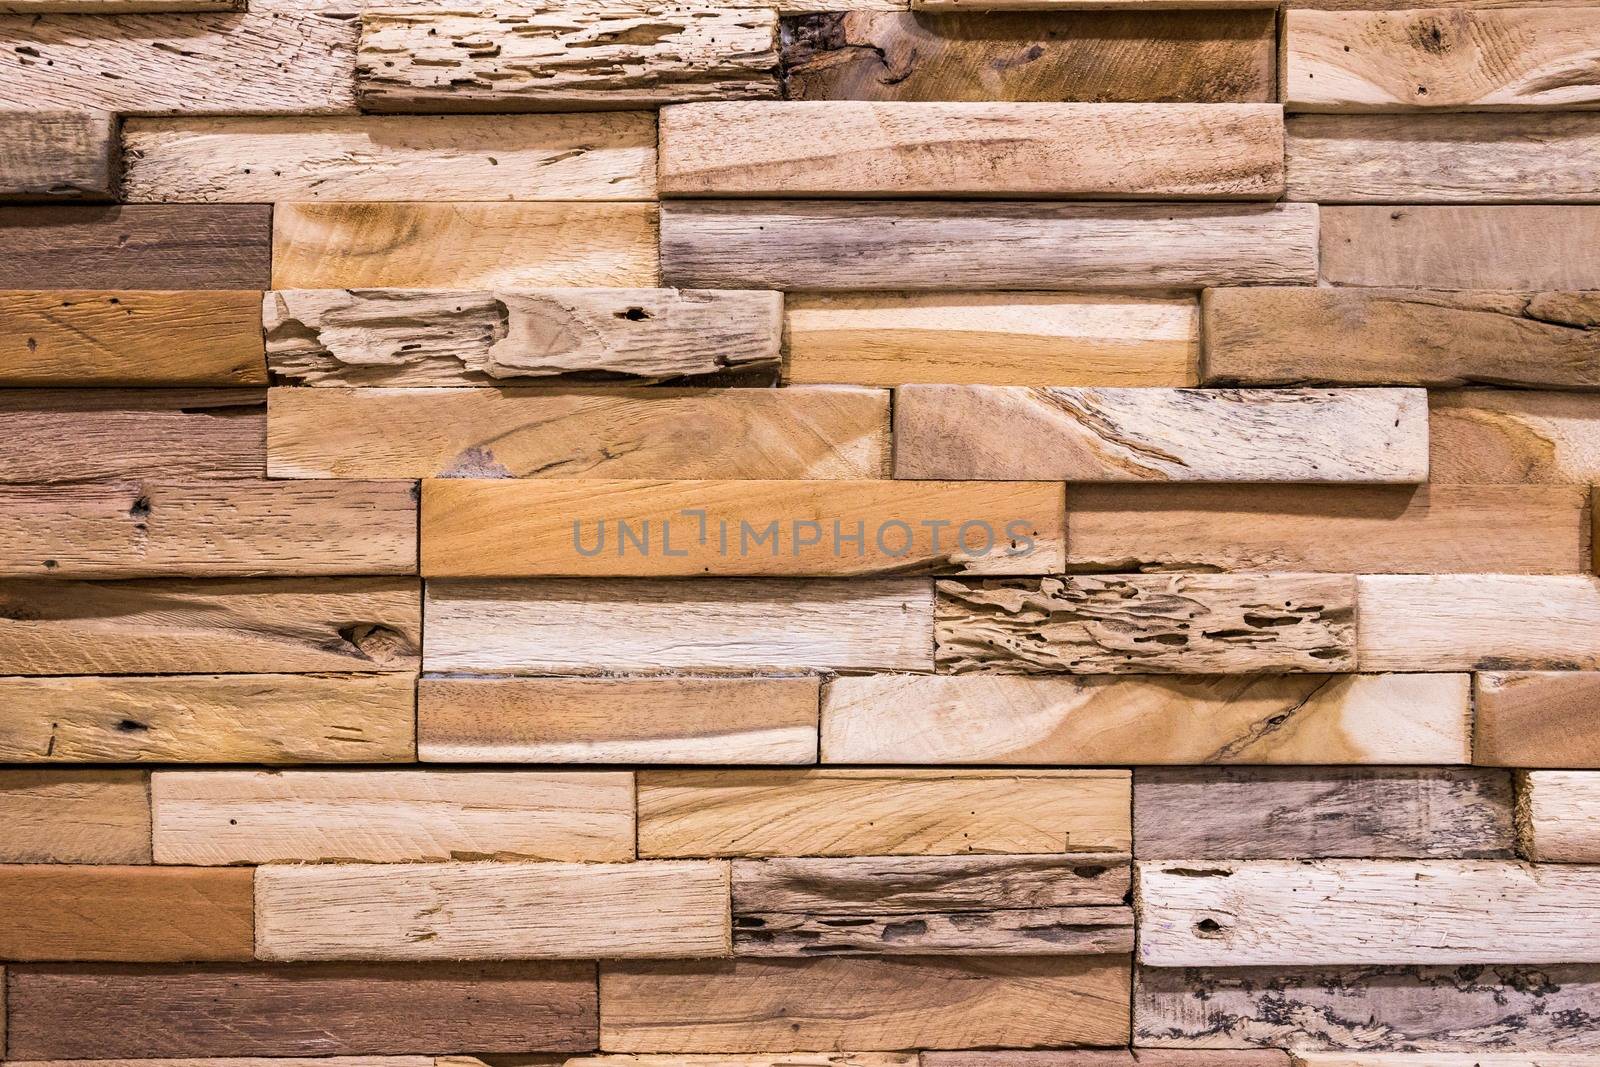 Small wooden bricks Arranged together into a beautiful wooden wall For interior decoration of buildings or floors and web backgrounds,Old wood wall texture , wooden background Banner by petrsvoboda91